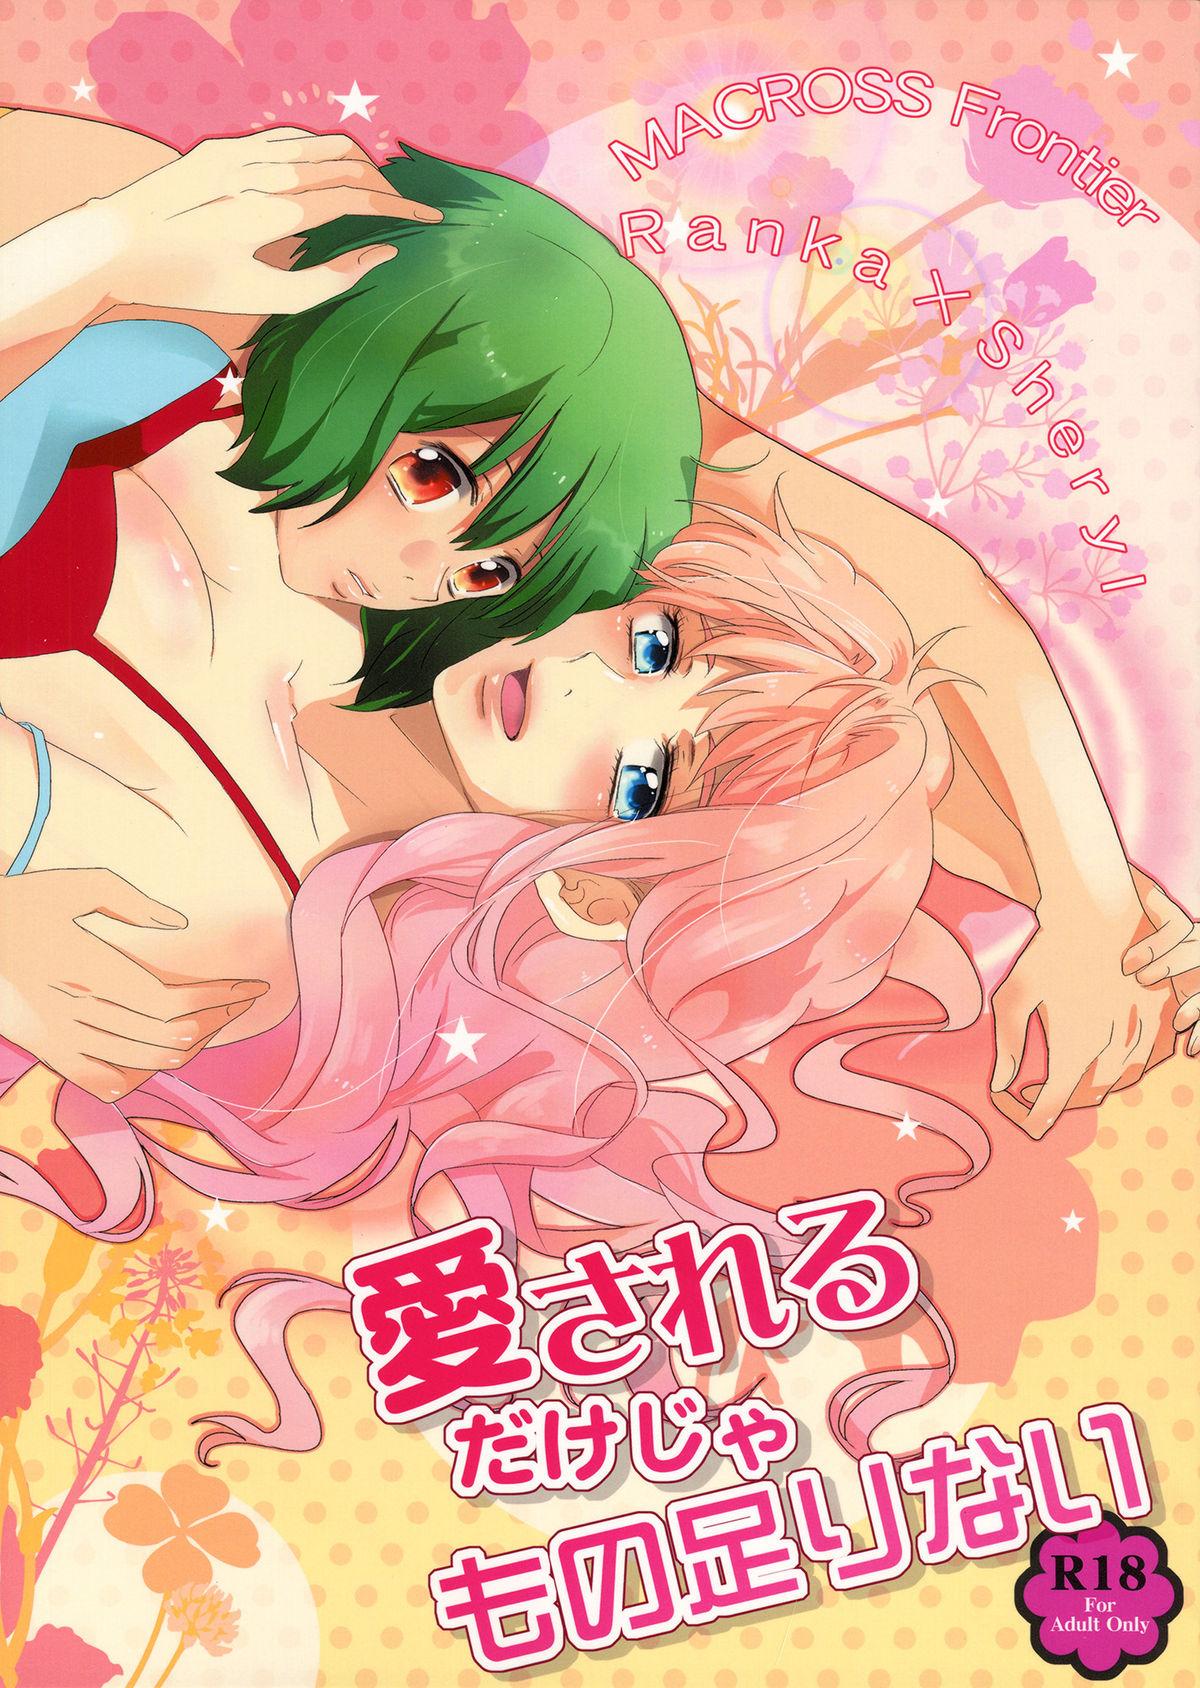 Suckingcock It's Not Enough to Just be Loved! - Macross frontier Naked - Page 1